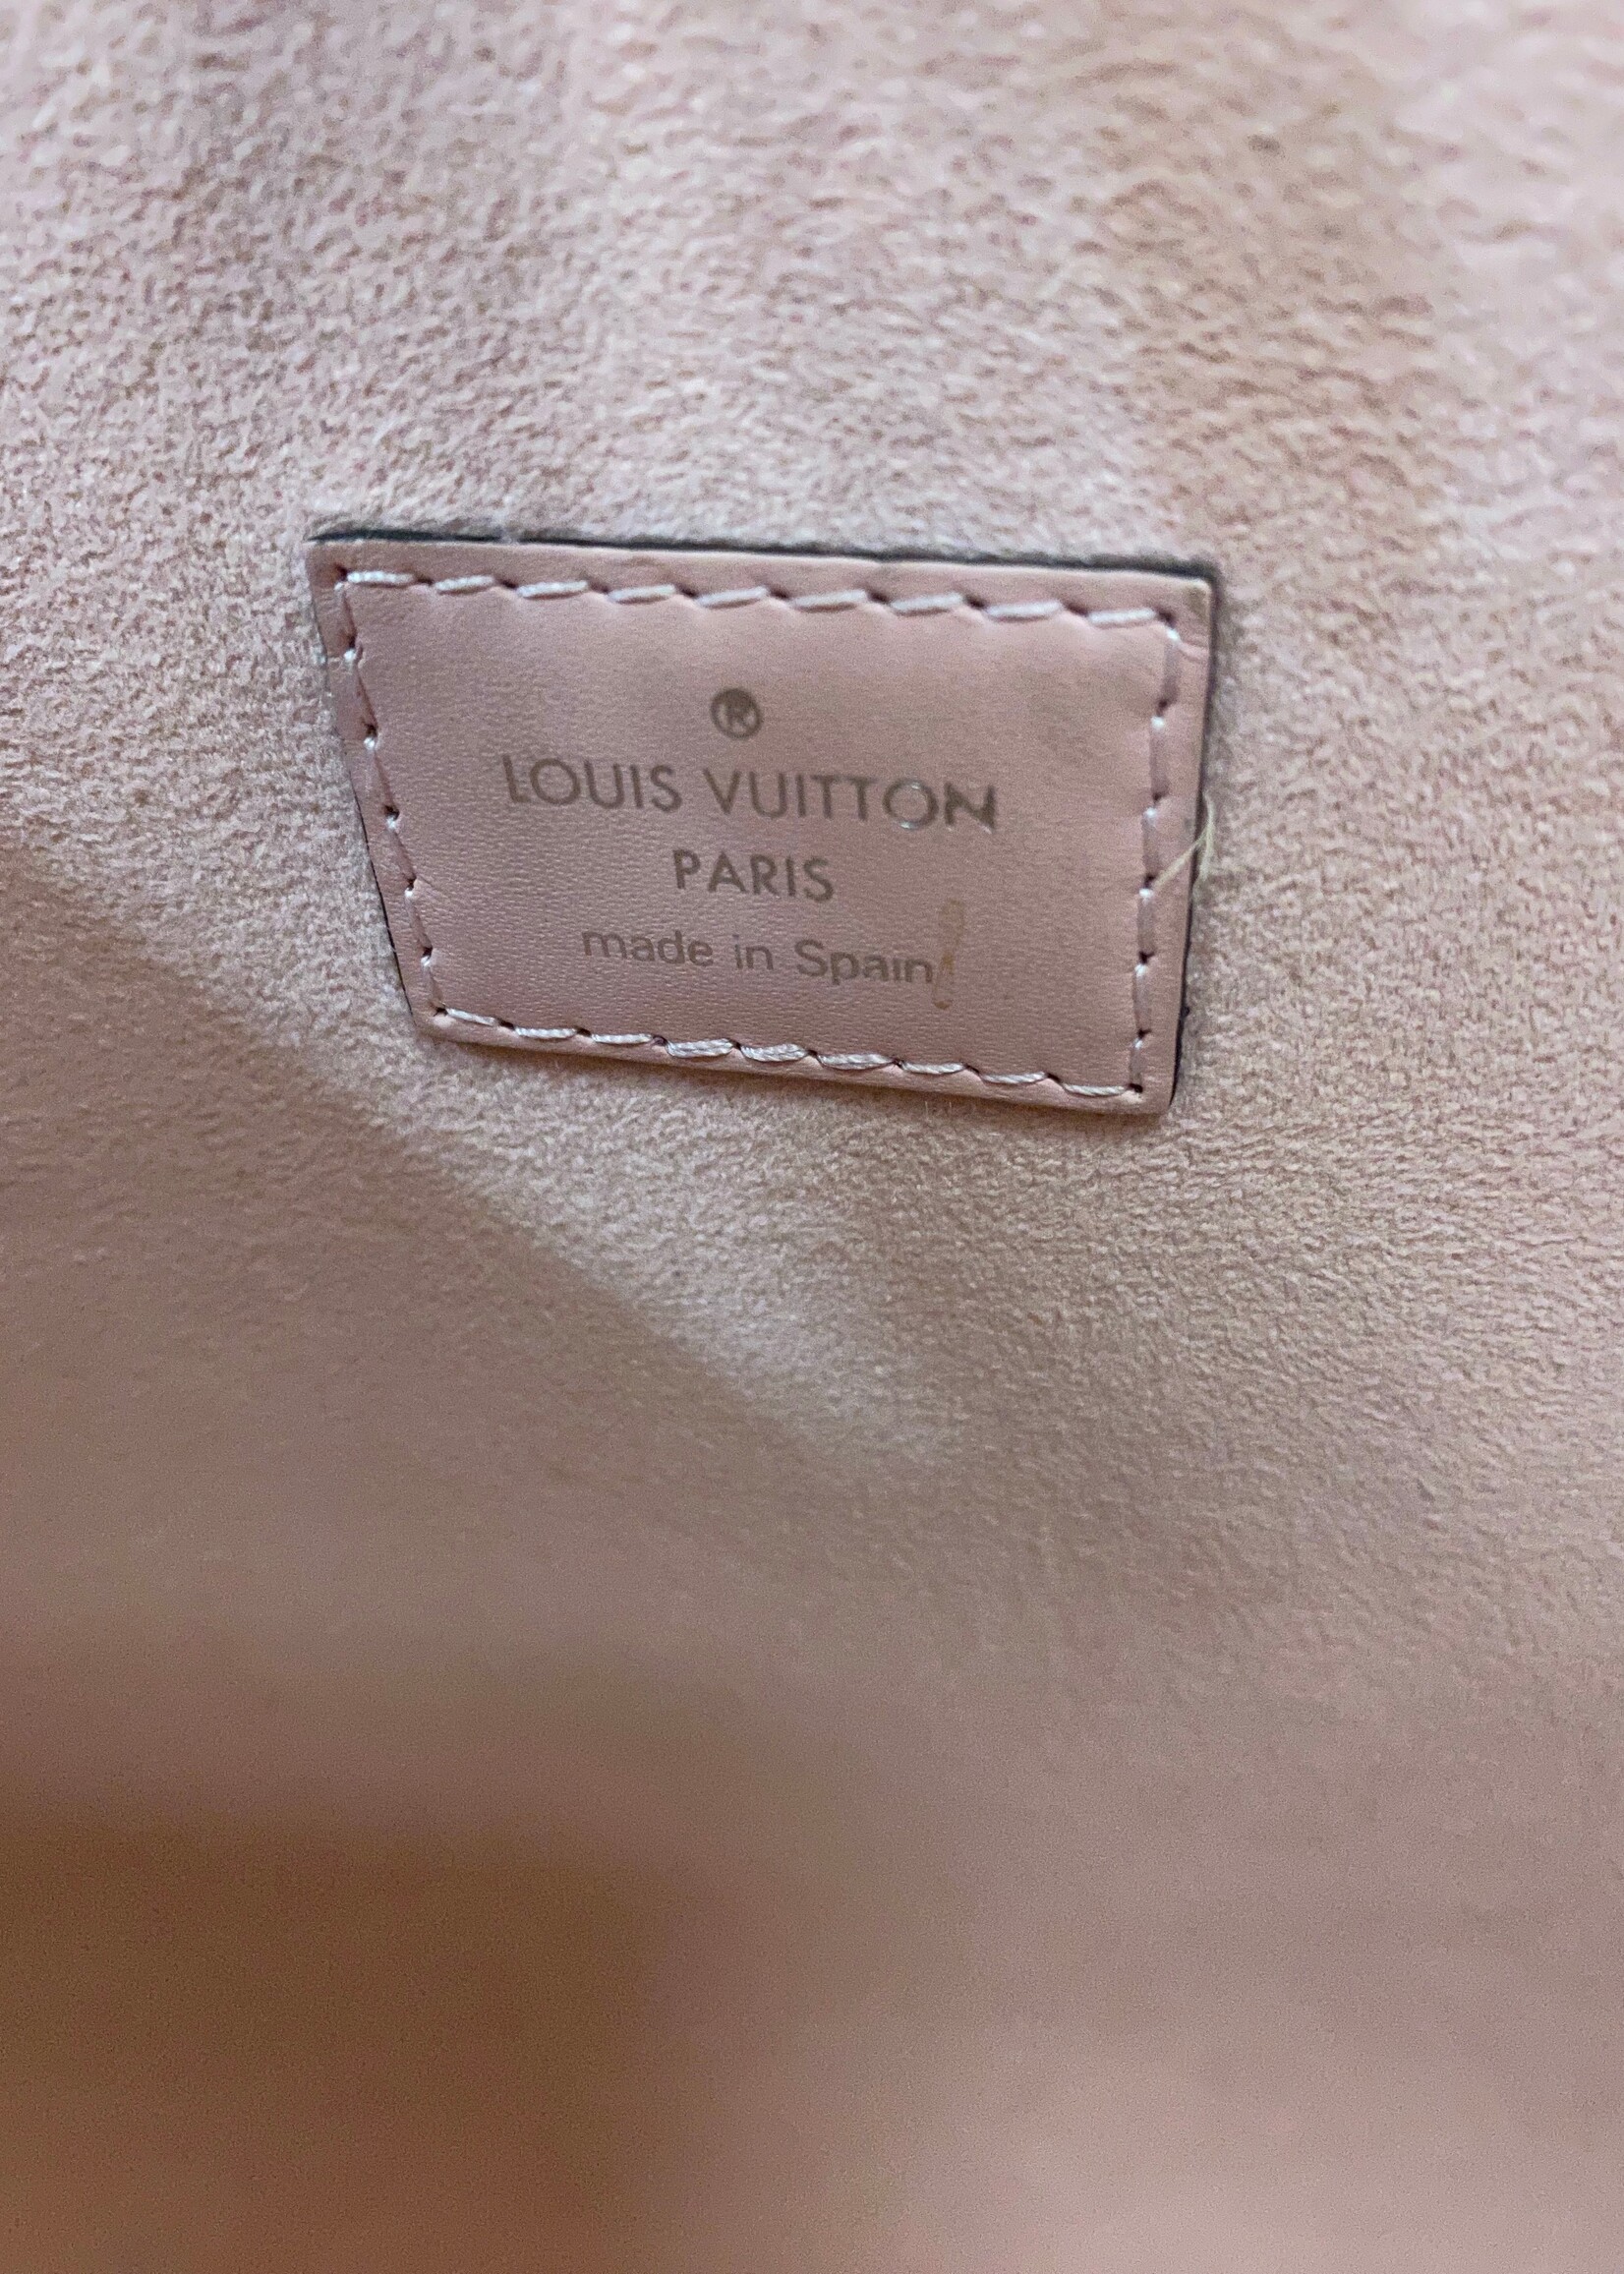 What Is Louis Vuitton Epi Leather Made Of